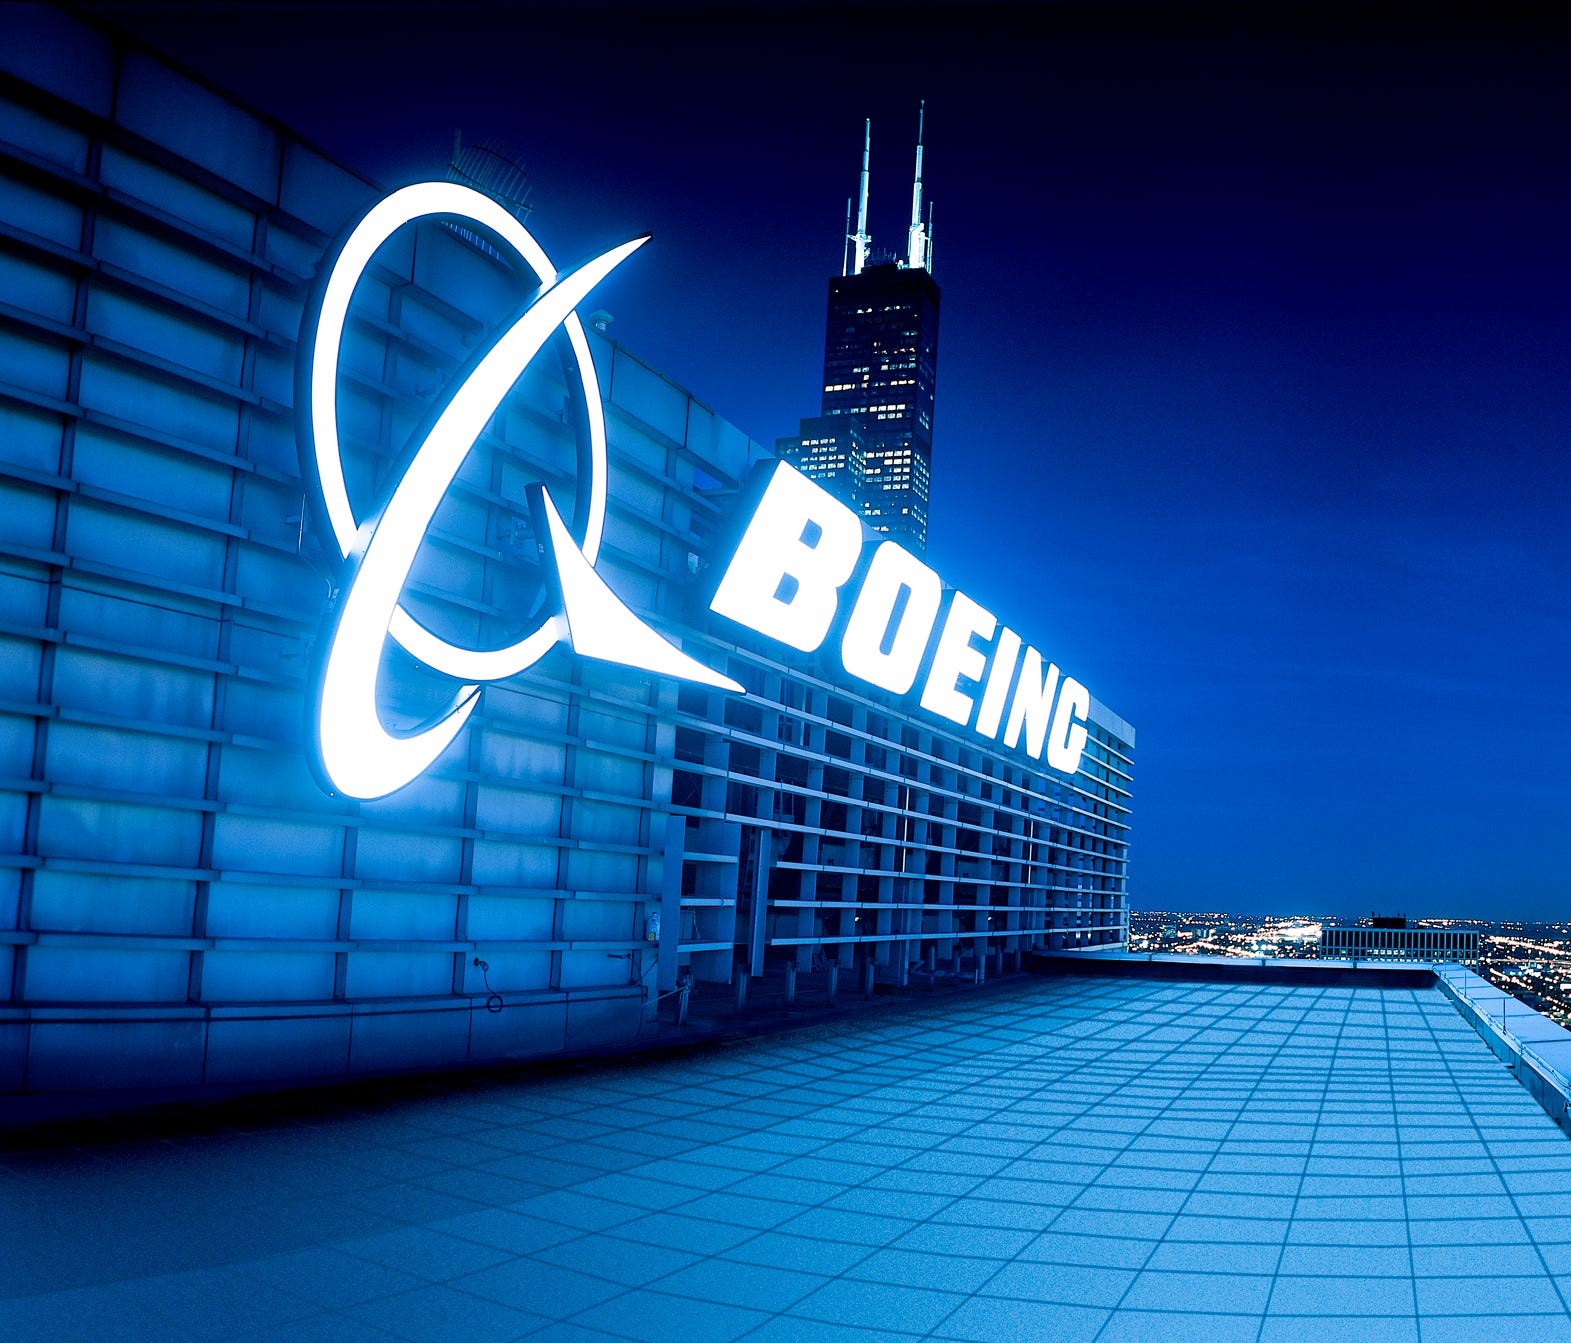 This file photo shows the logo sign atop the Boeing's corporate headquarters in Chicago.